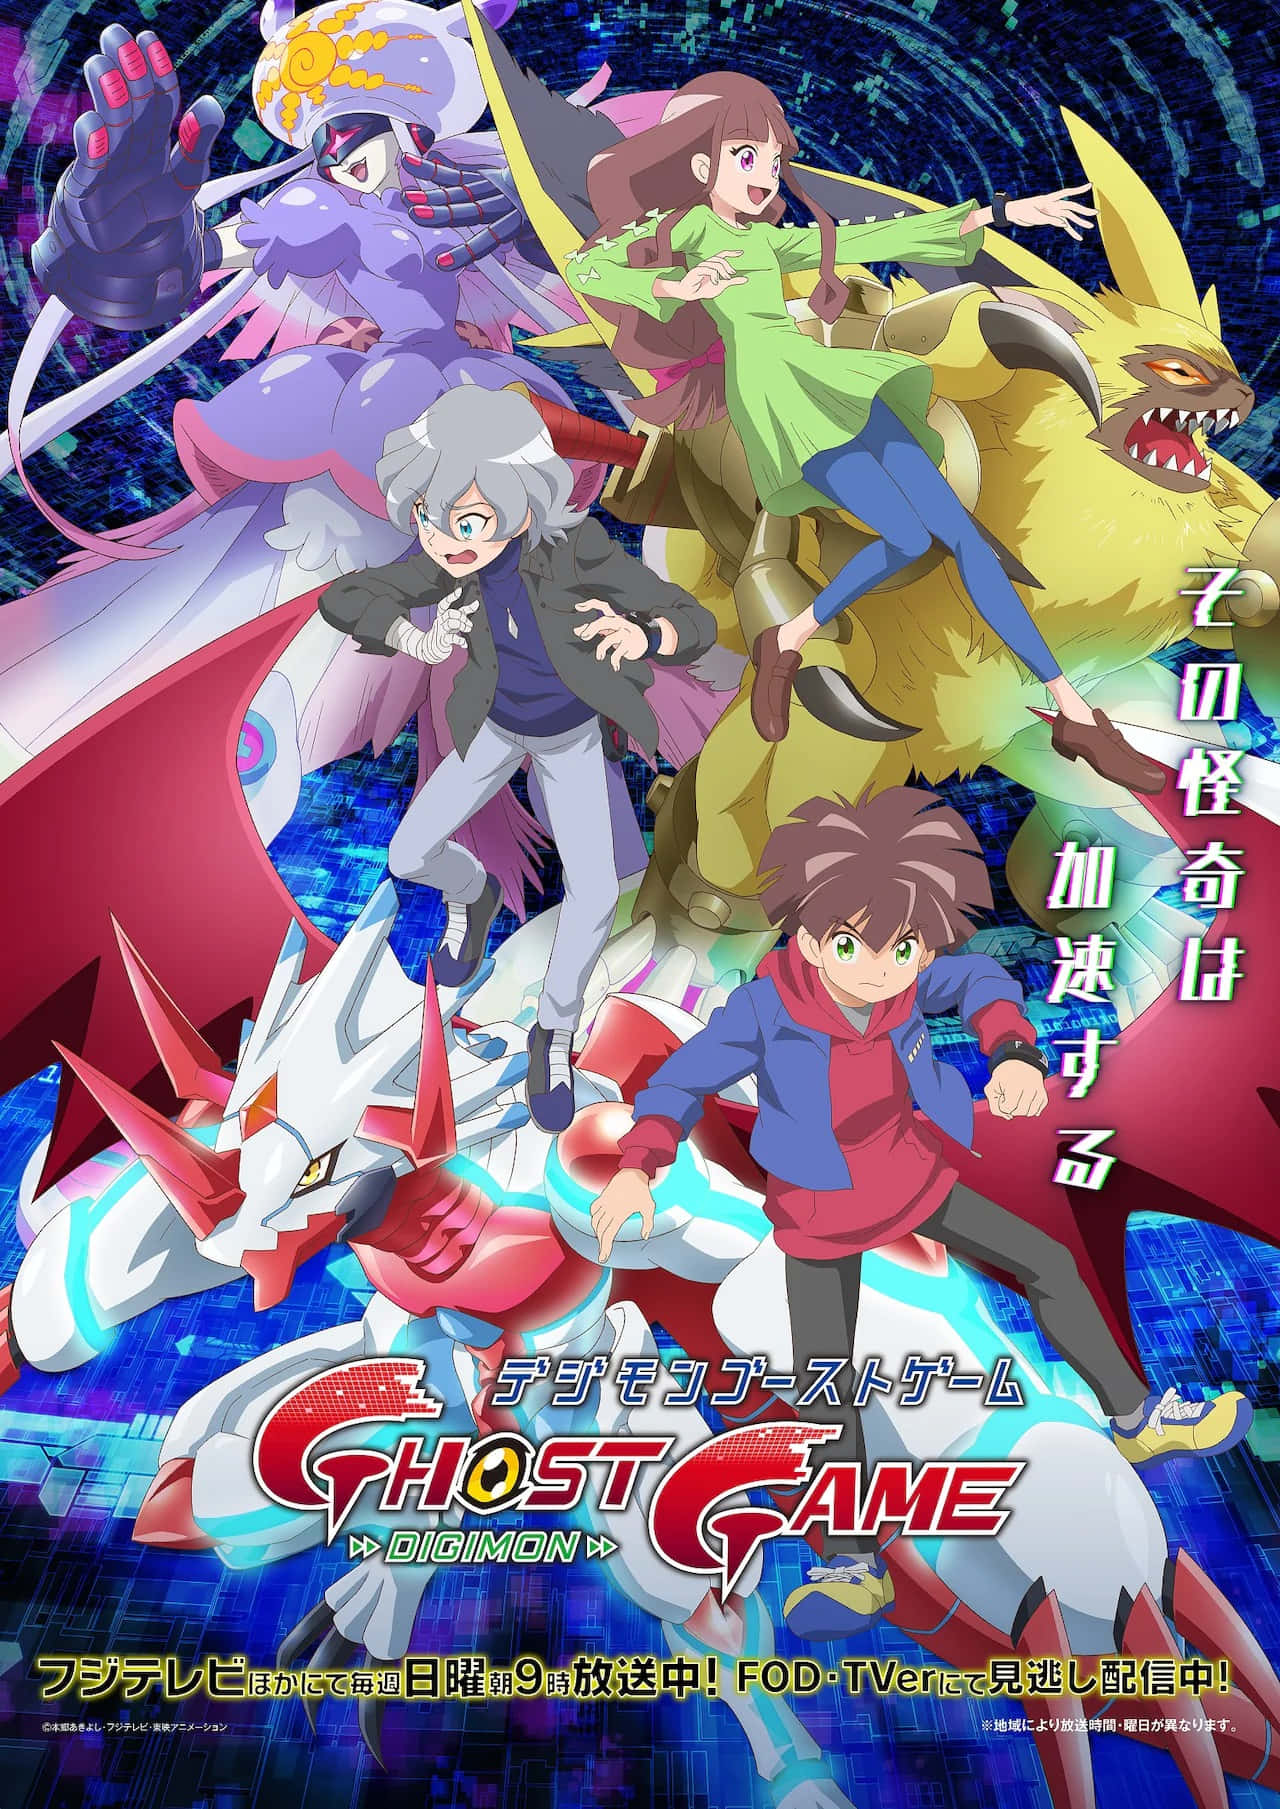 Imagende Digimon Ghost Game